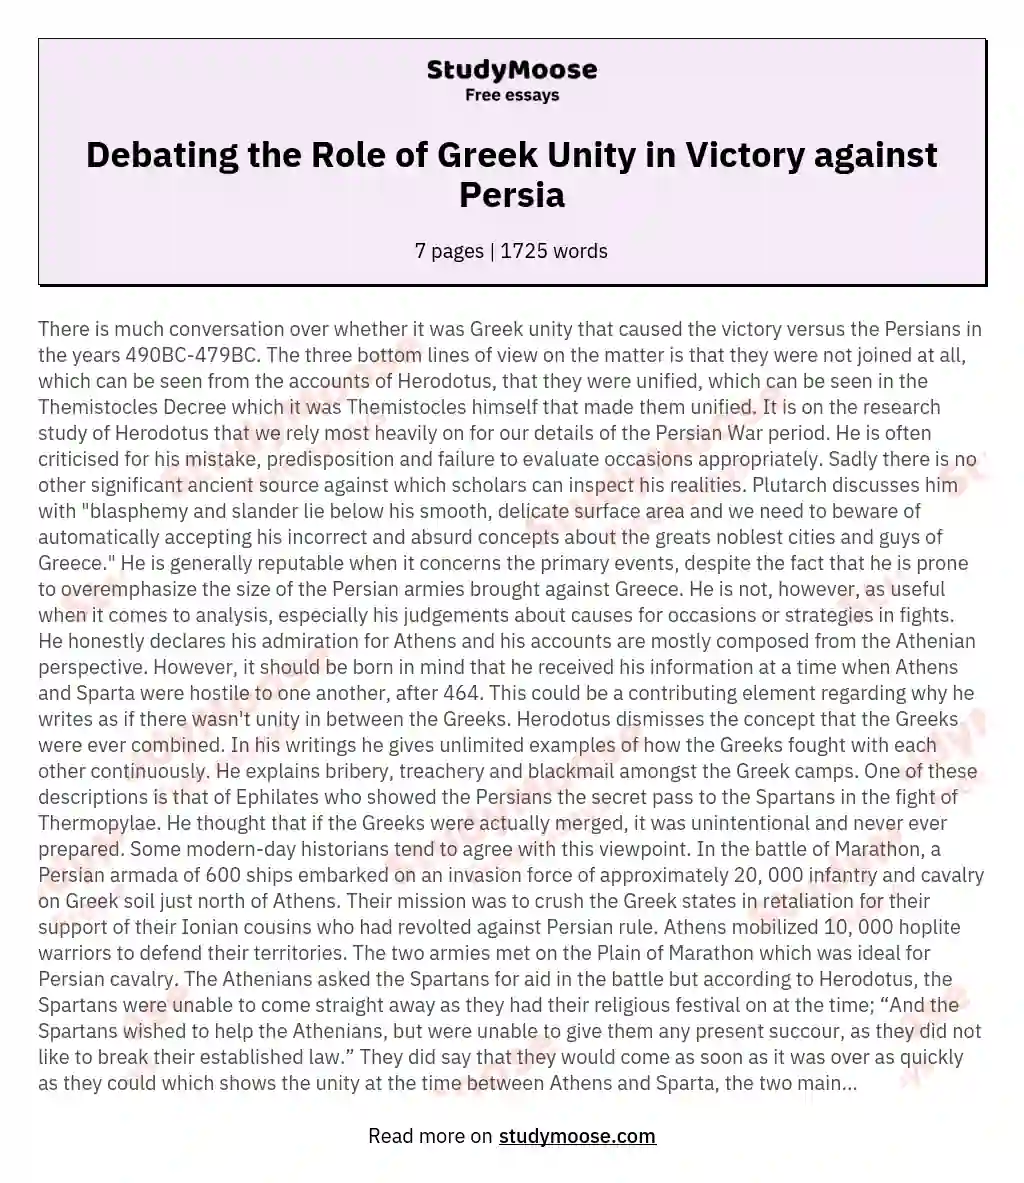 Debating the Role of Greek Unity in Victory against Persia